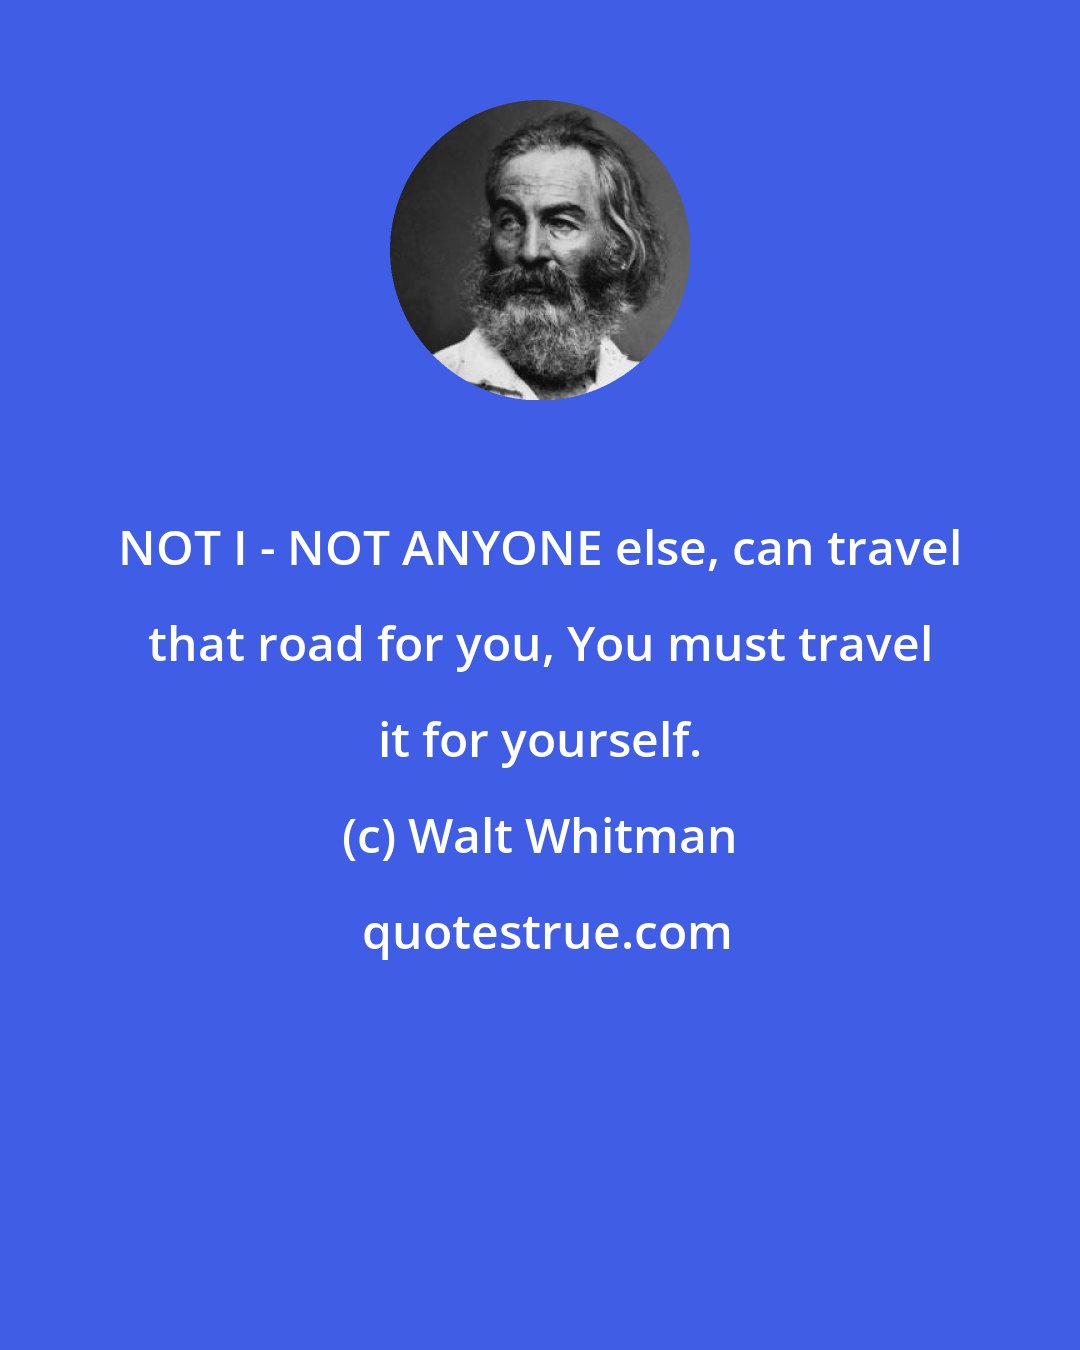 Walt Whitman: NOT I - NOT ANYONE else, can travel that road for you, You must travel it for yourself.